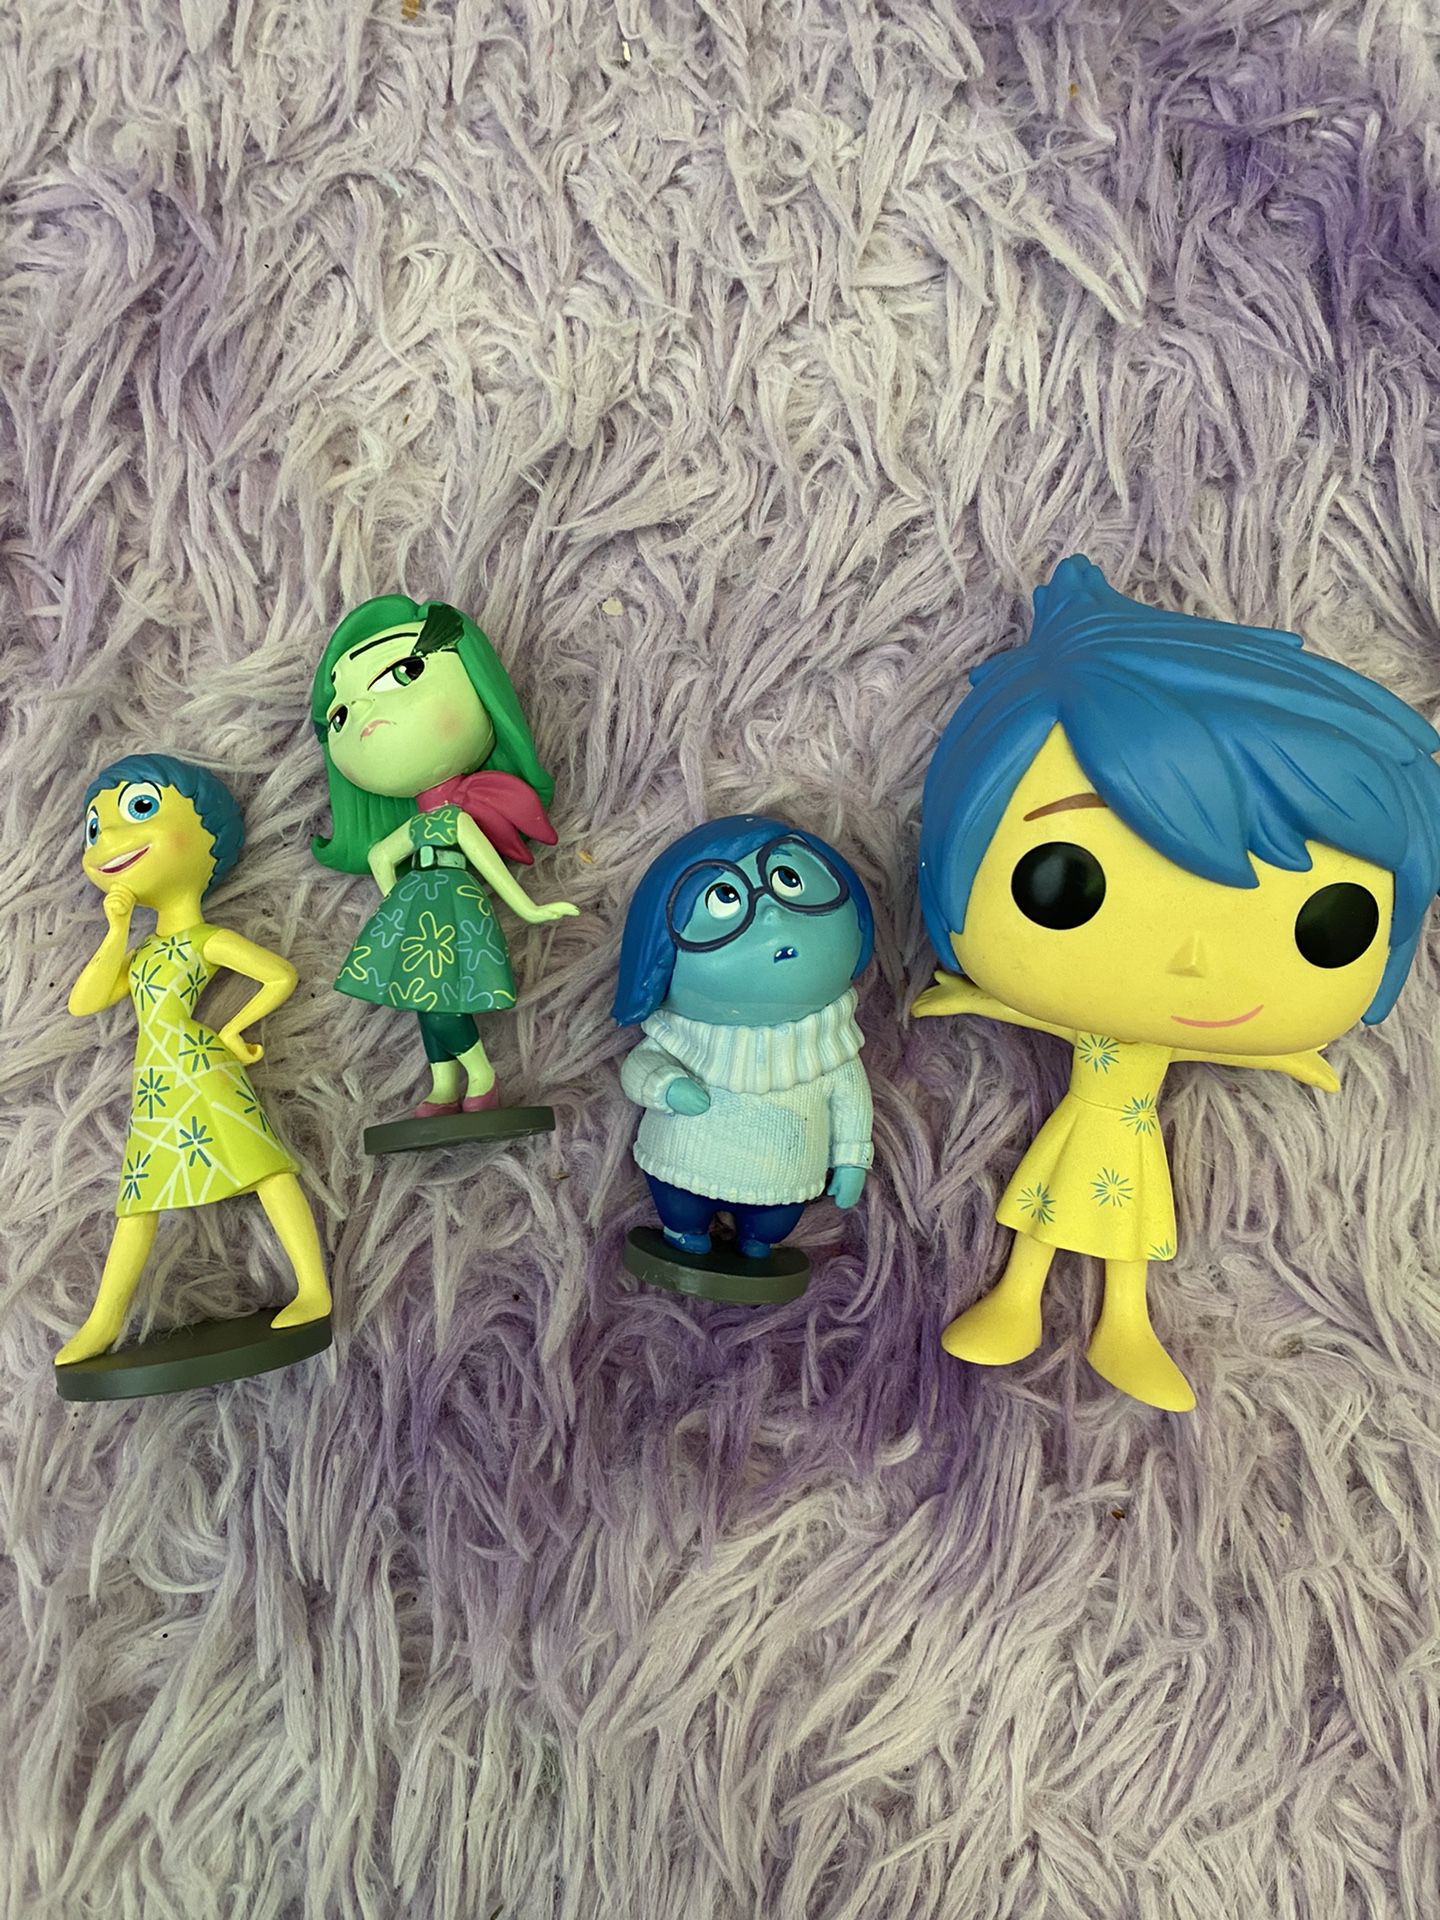 Inside out toys